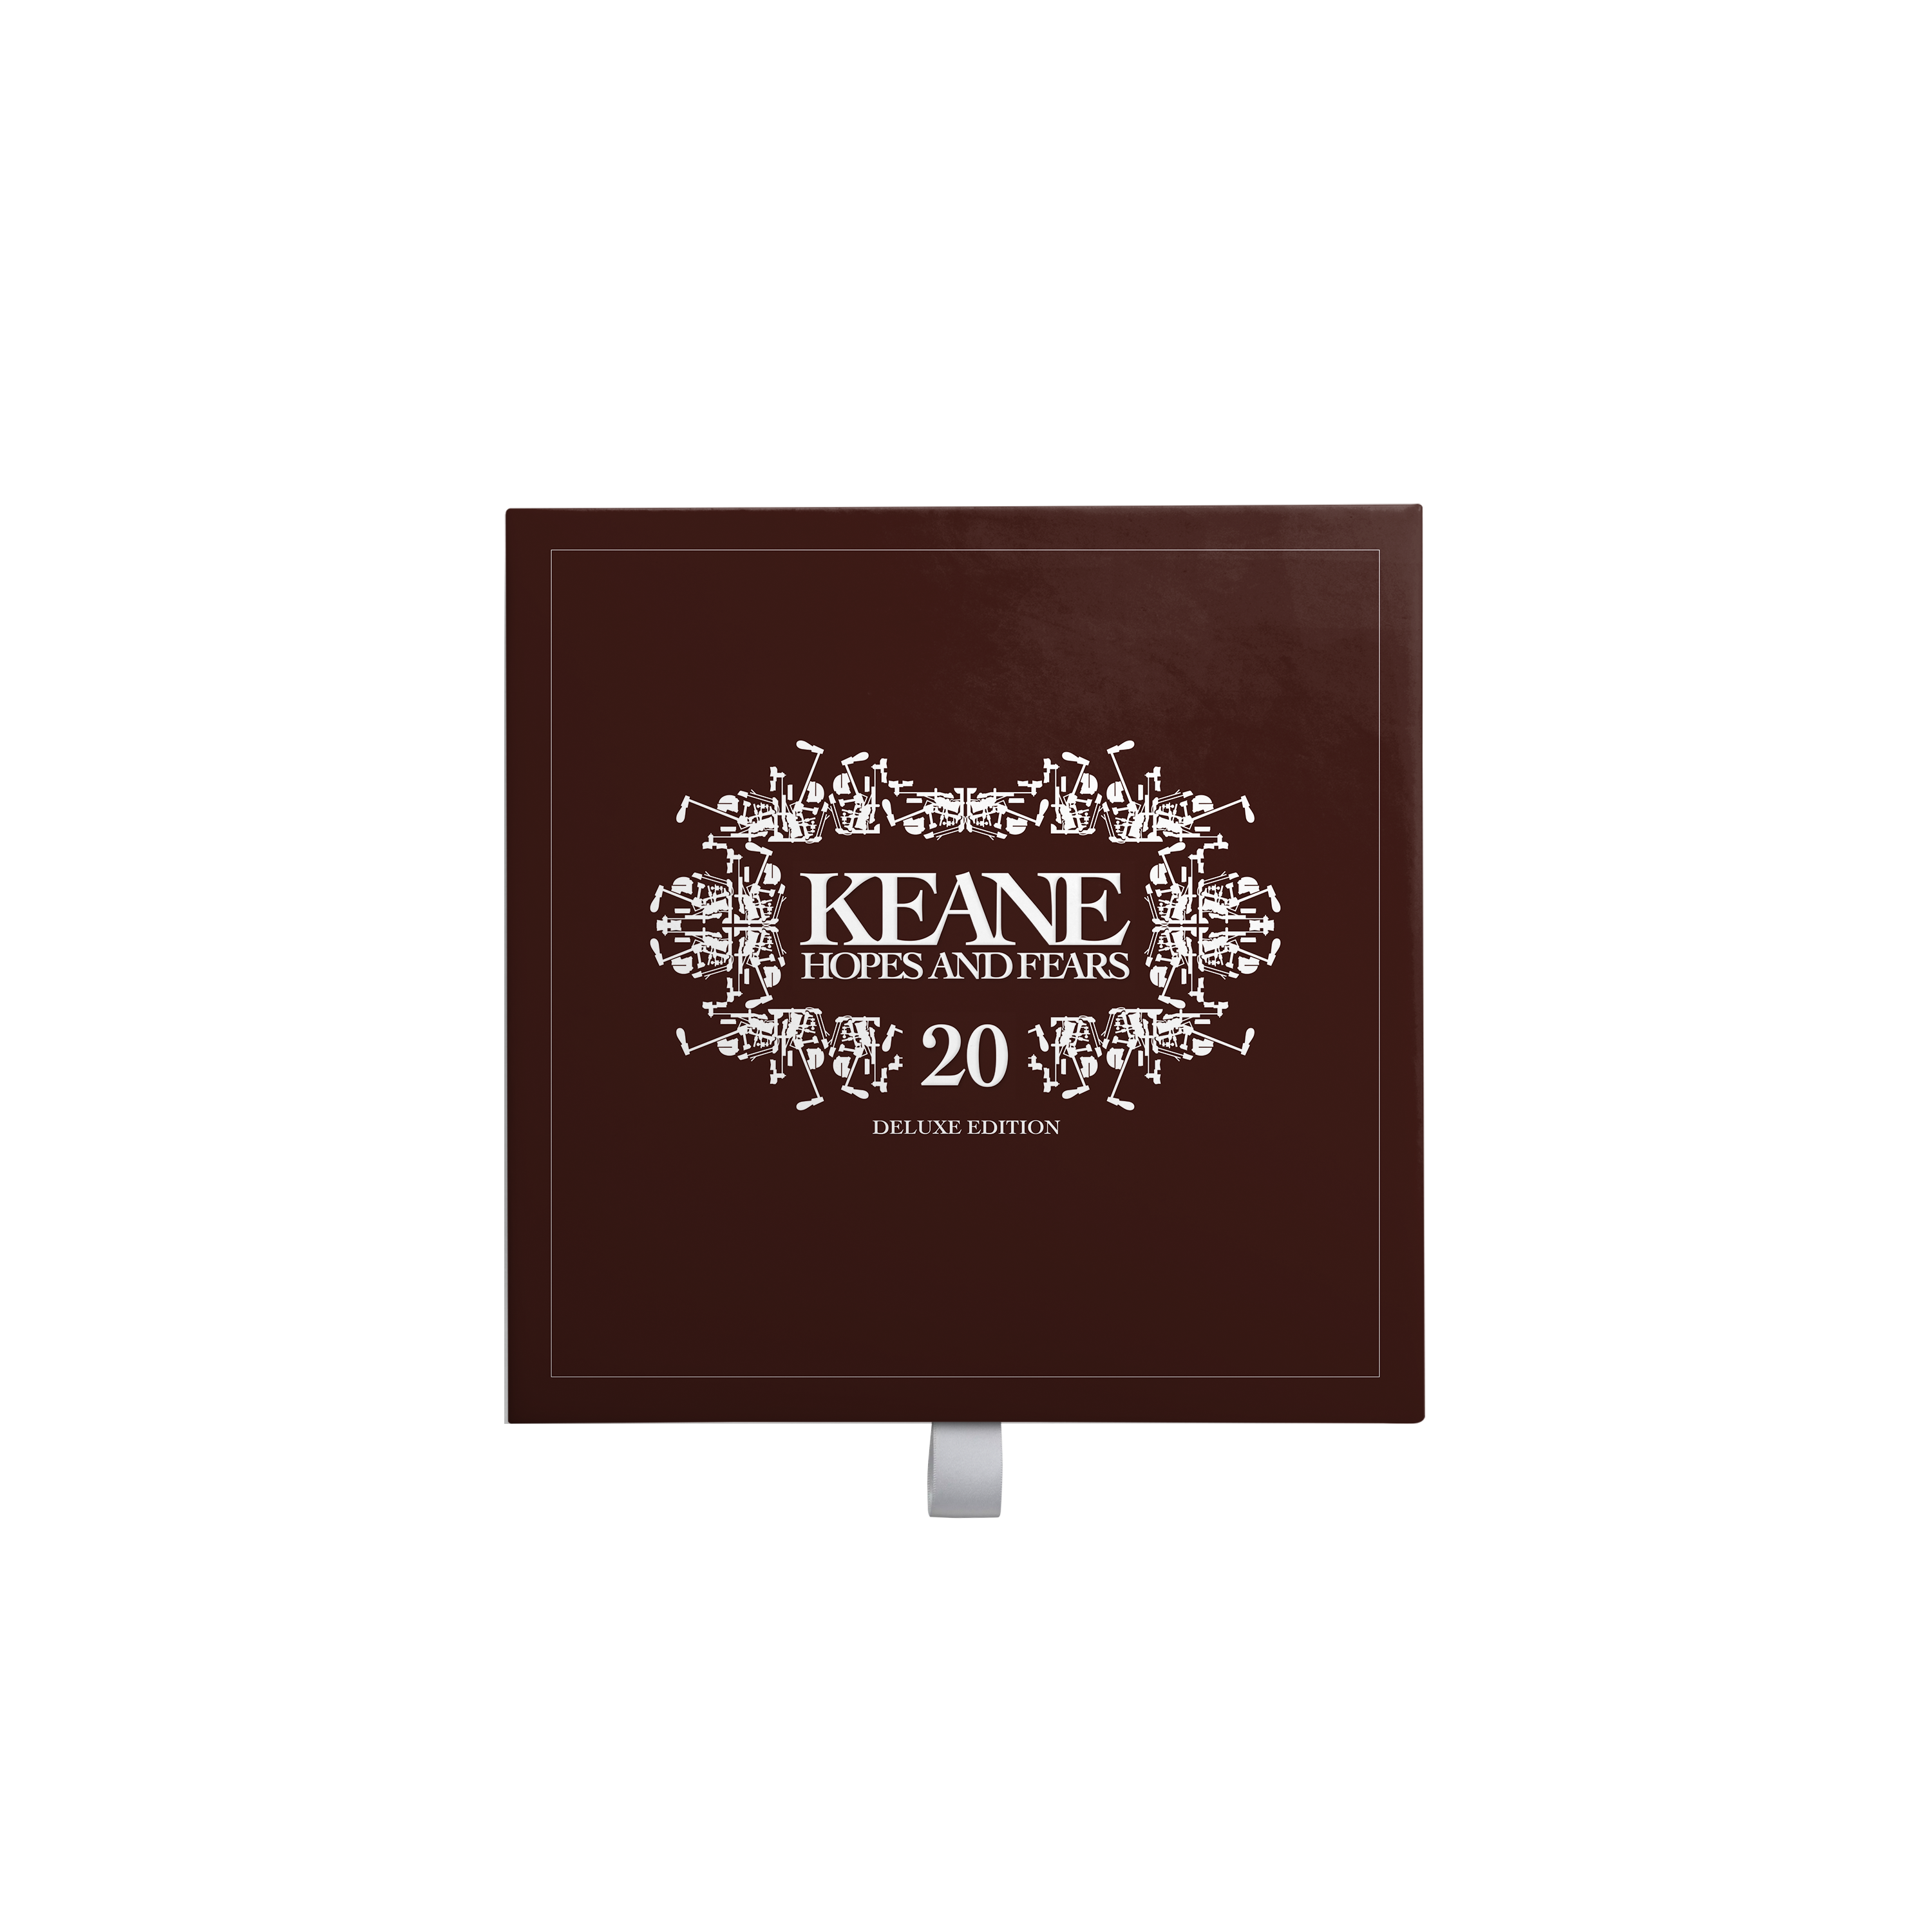 Keane - 20th Anniversary Signed Hopes and Fears Limited Deluxe 3CD Box Set + 7" Single